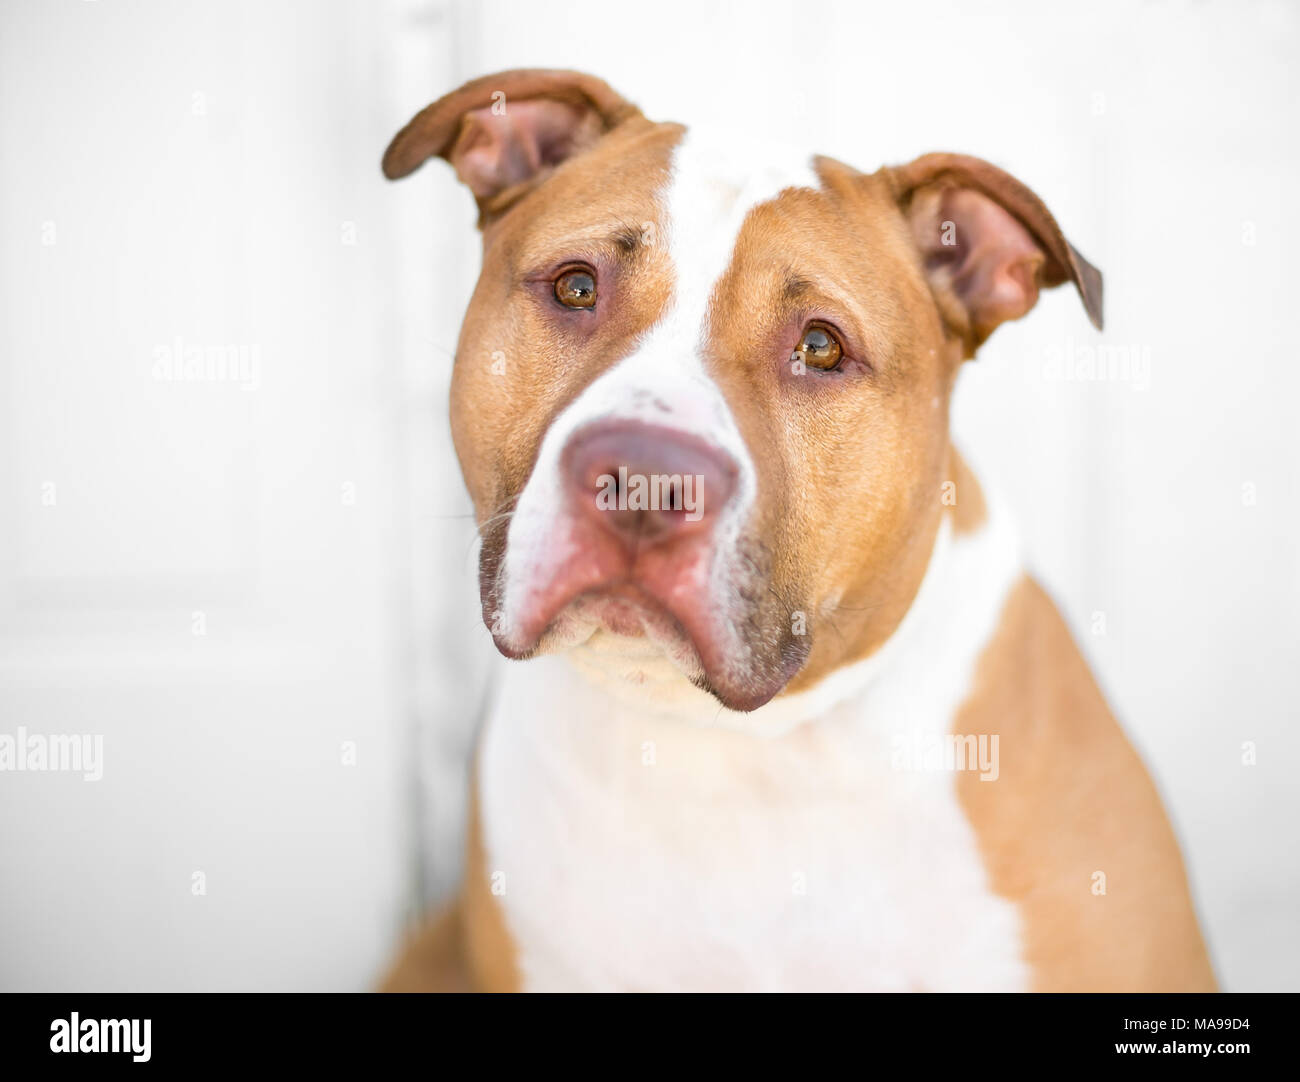 A red and white Pit Bull mixed breed dog with a sad expression Stock Photo